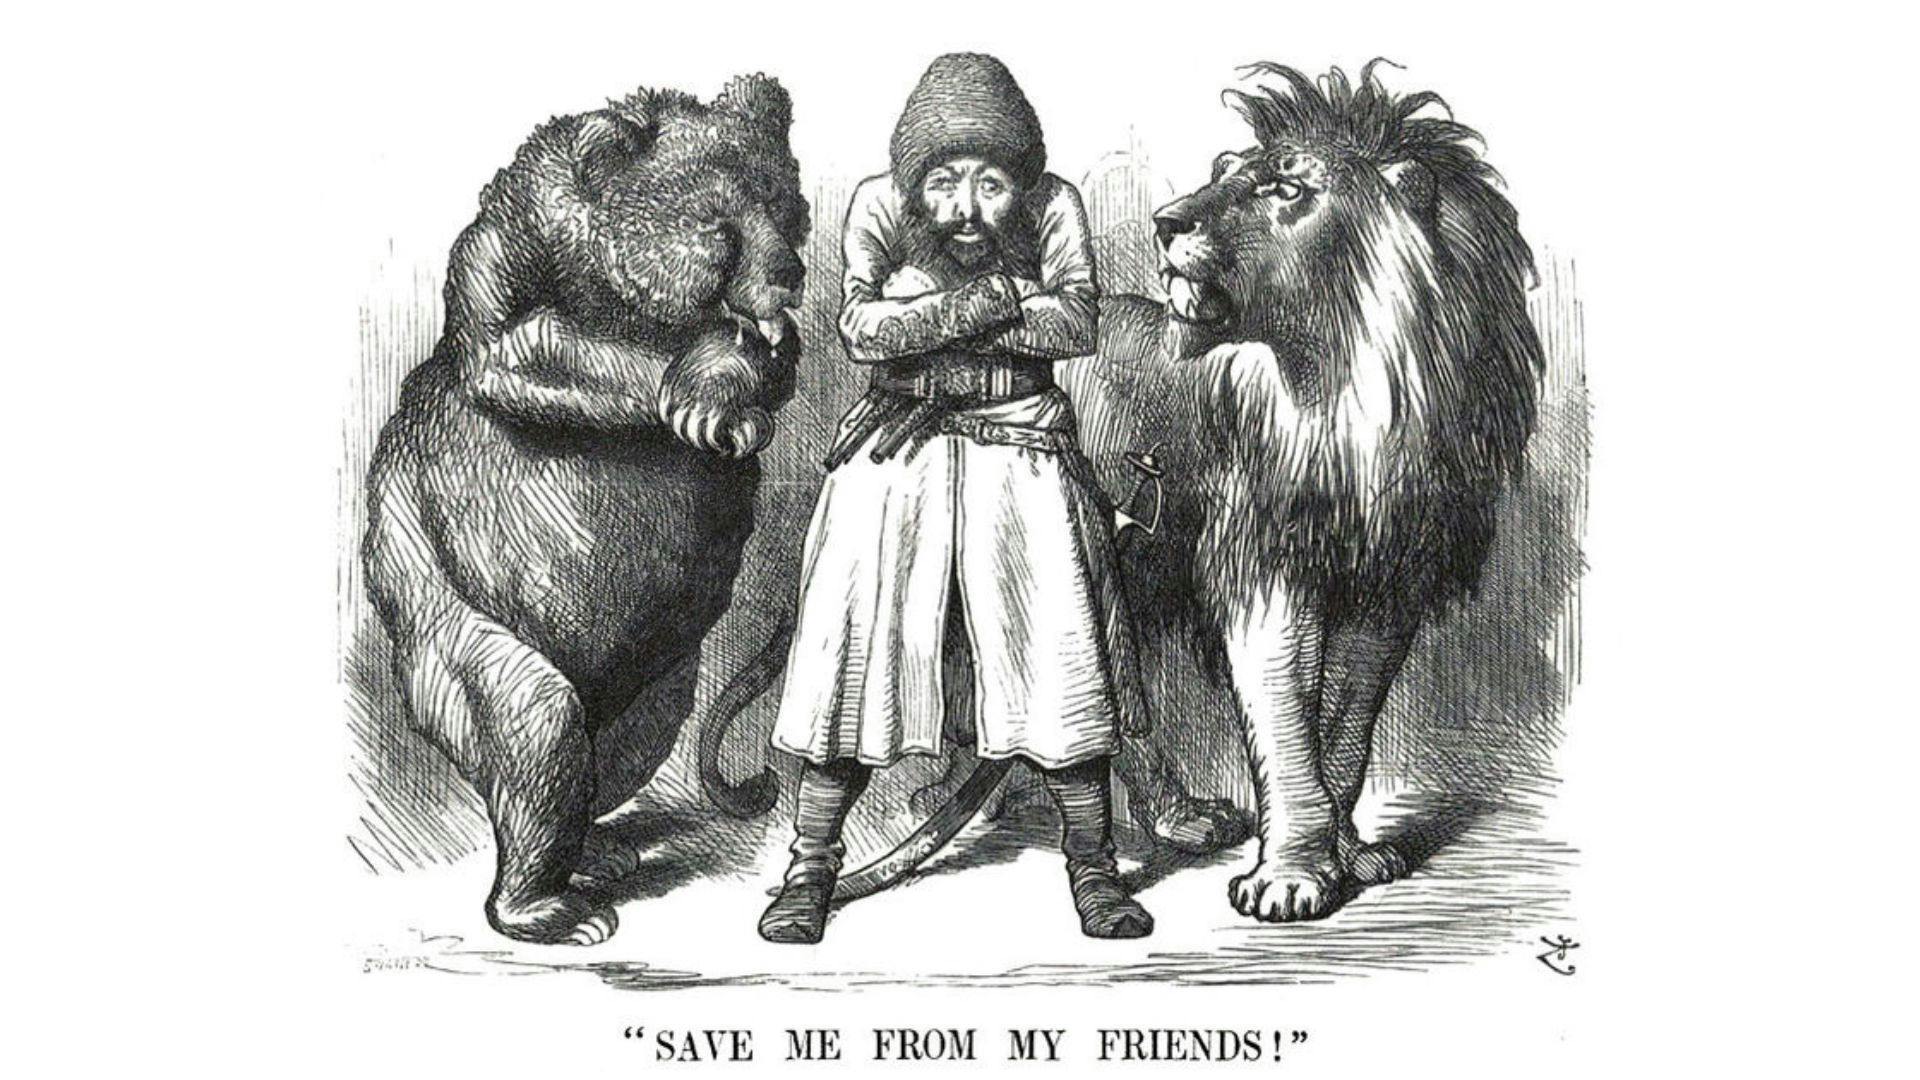 A political cartoon depicting the Afghan Emir Sher Ali with his "friends" the Russian Bear and British Lion (1878). The Great Game was a political confrontation between the British Empire and the Russian Empire over Afghanistan and territories in Central and South Asia | Wikimedia Commons